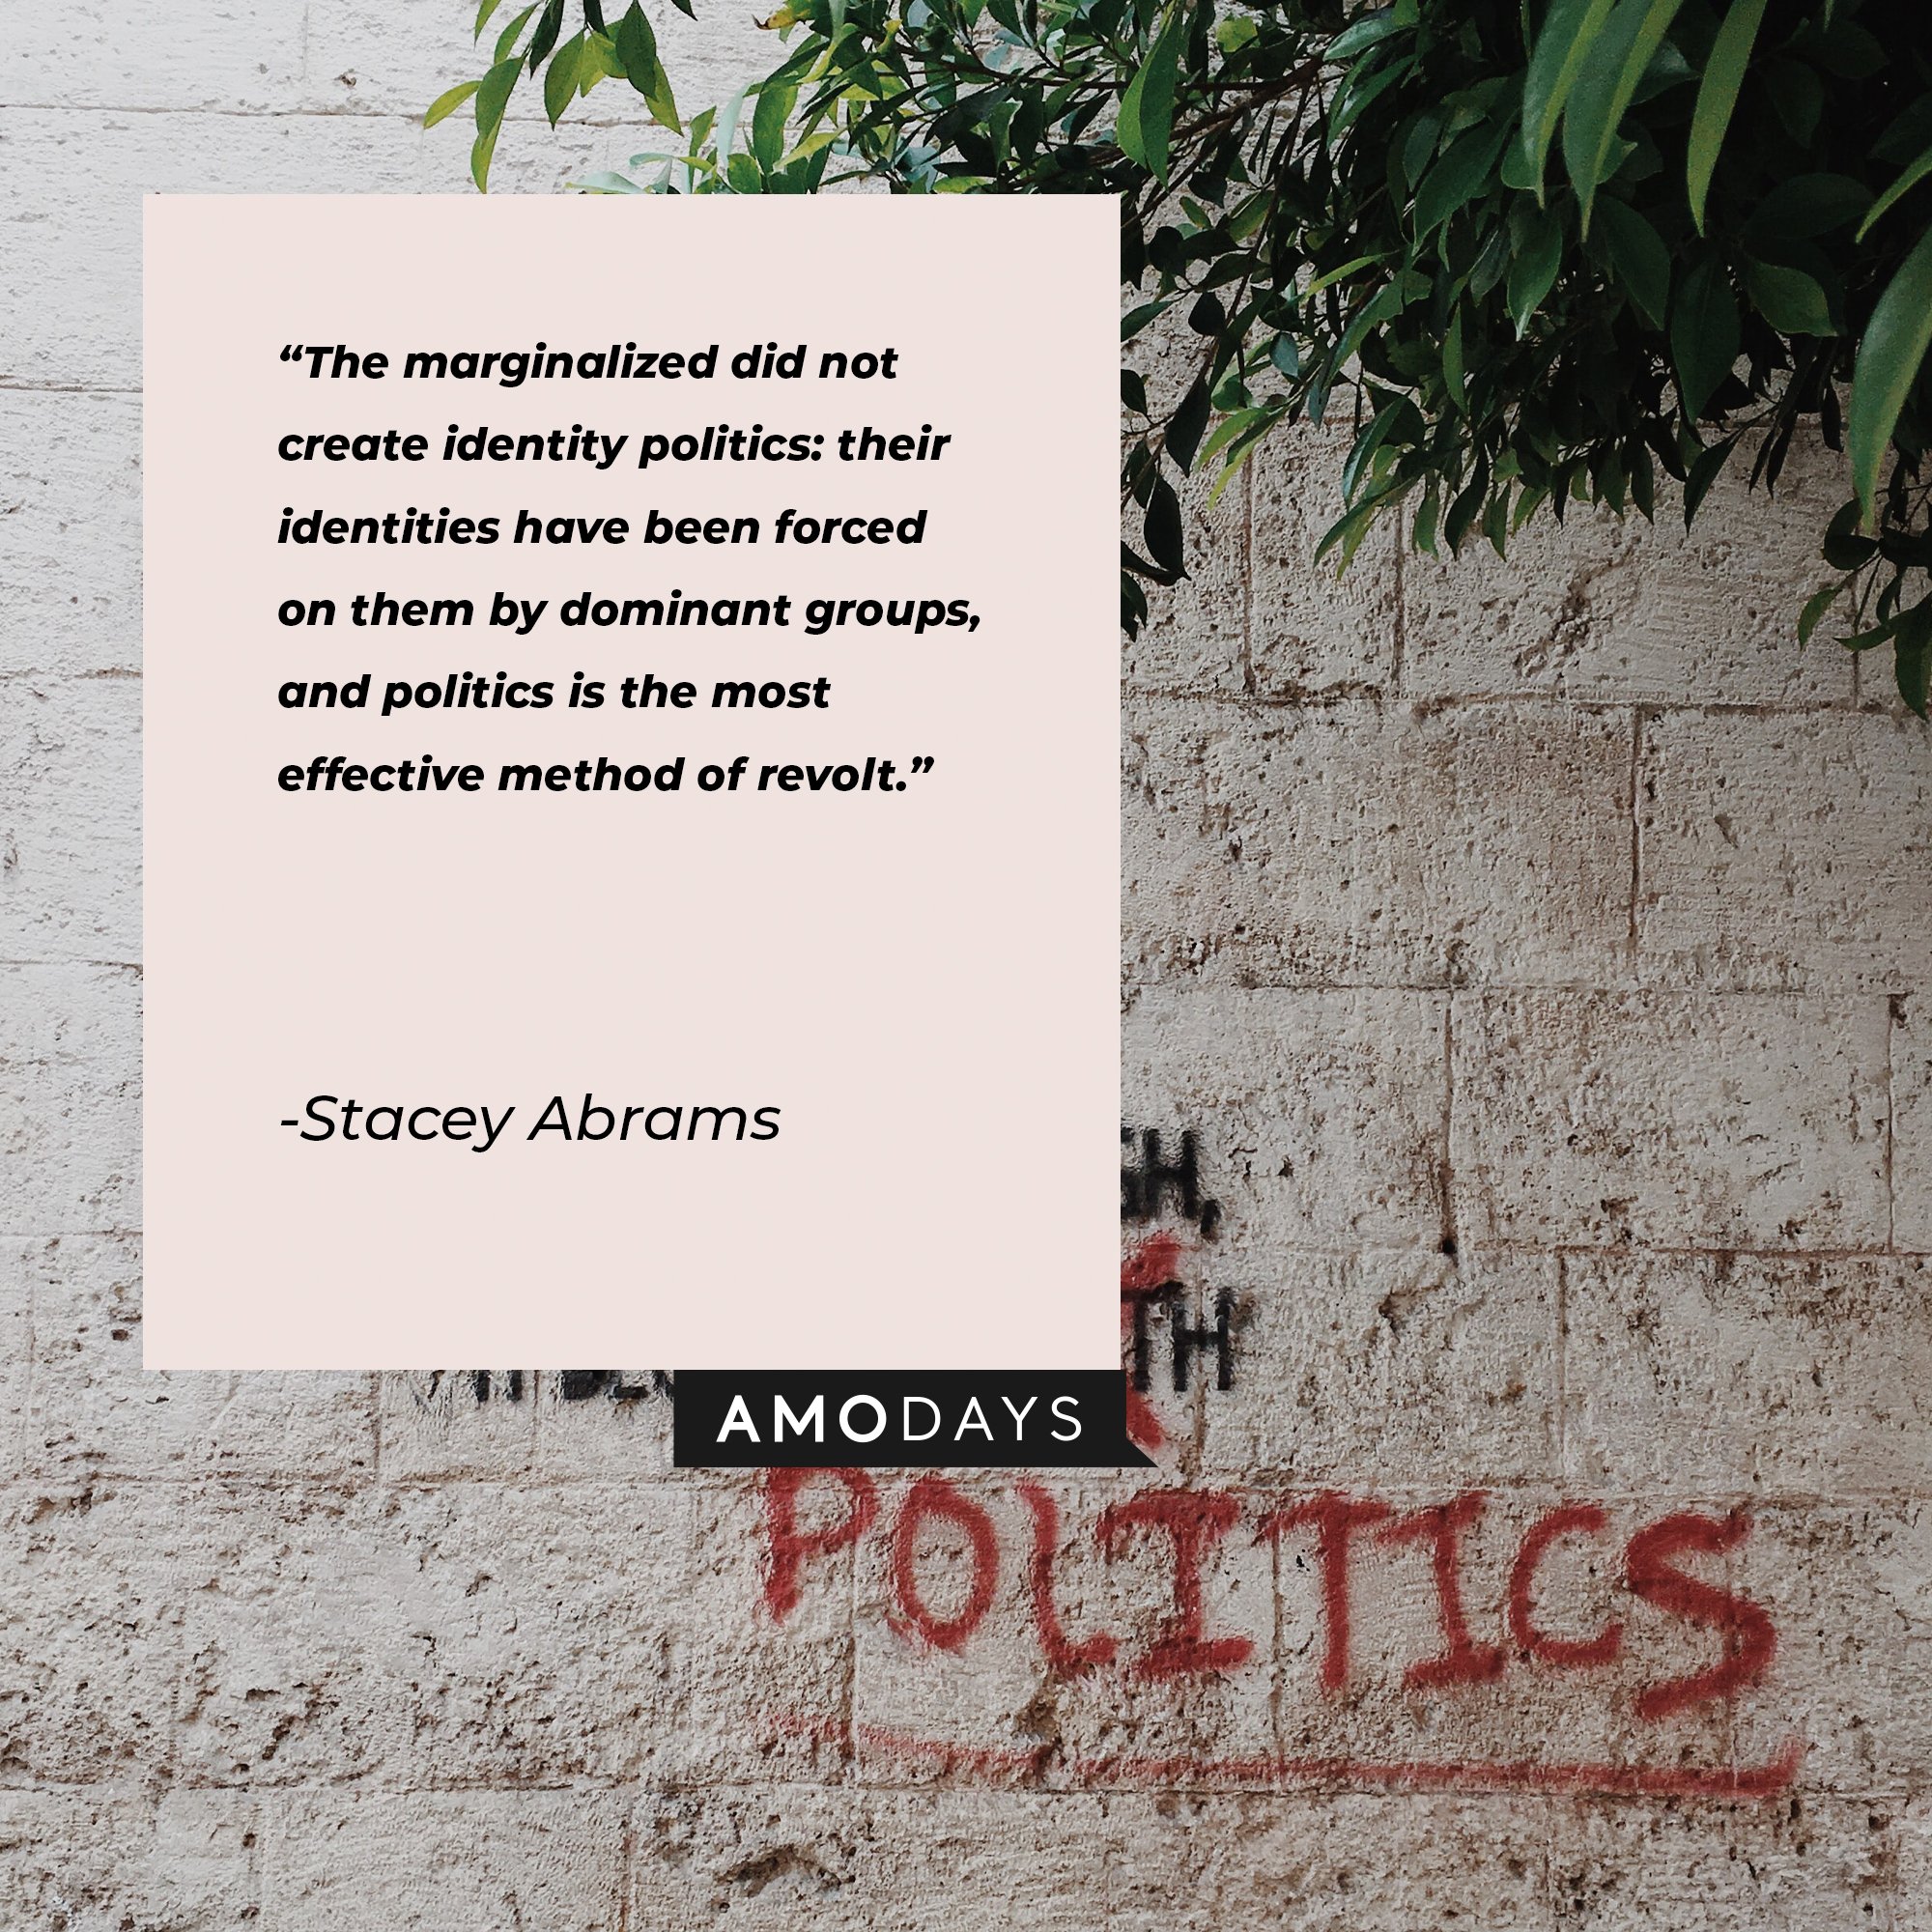 Stacey Abrams’s quote: "The marginalized did not create identity politics: their identities have been forced on them by dominant groups, and politics is the most effective method of revolt." | Image: AmoDays 